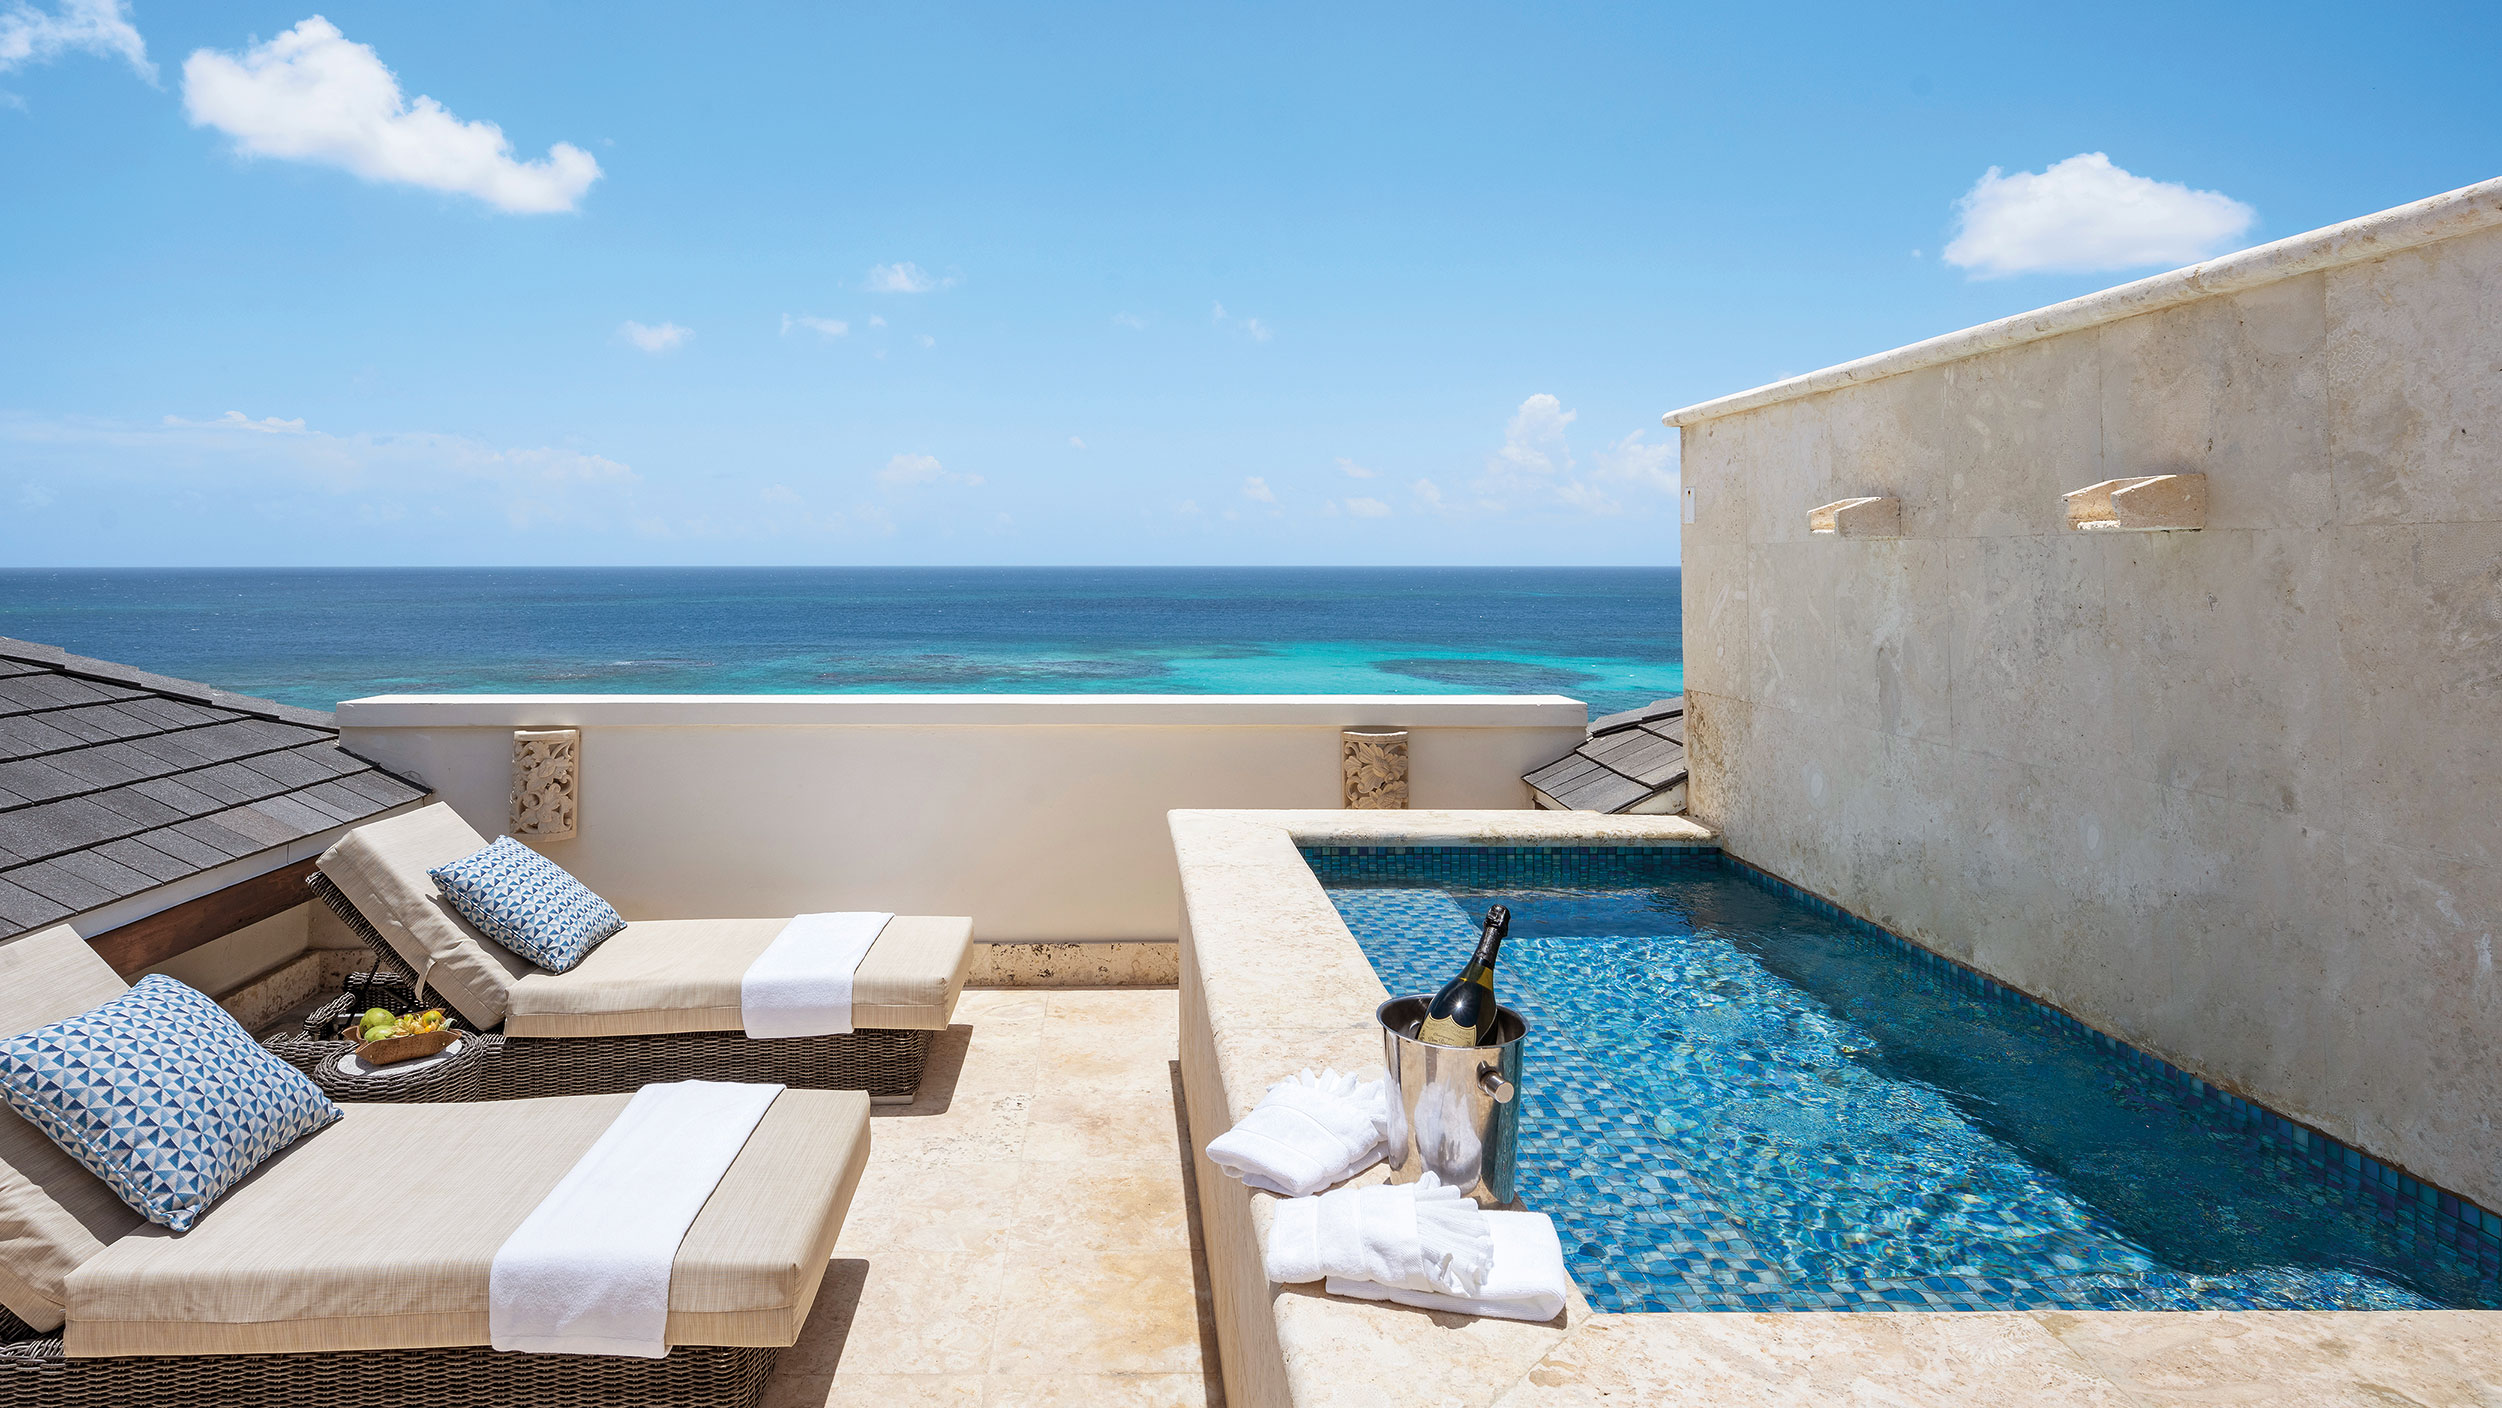 Plunge pool and lounge chairs on balcony overlooking ocean